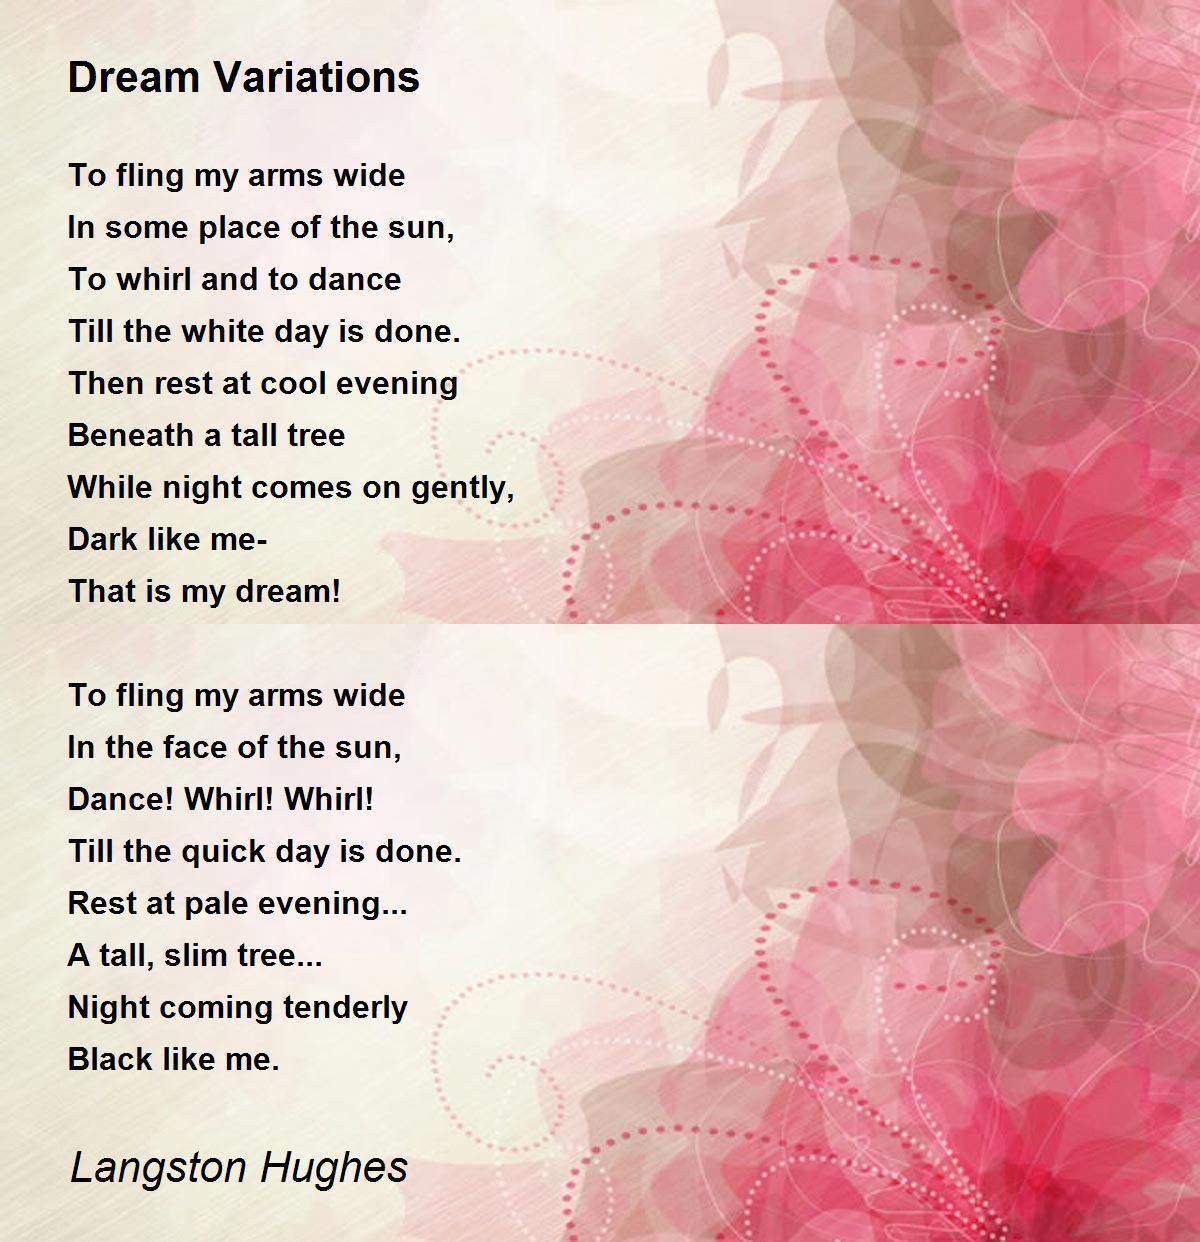 what is the theme of dream variations by langston hughes